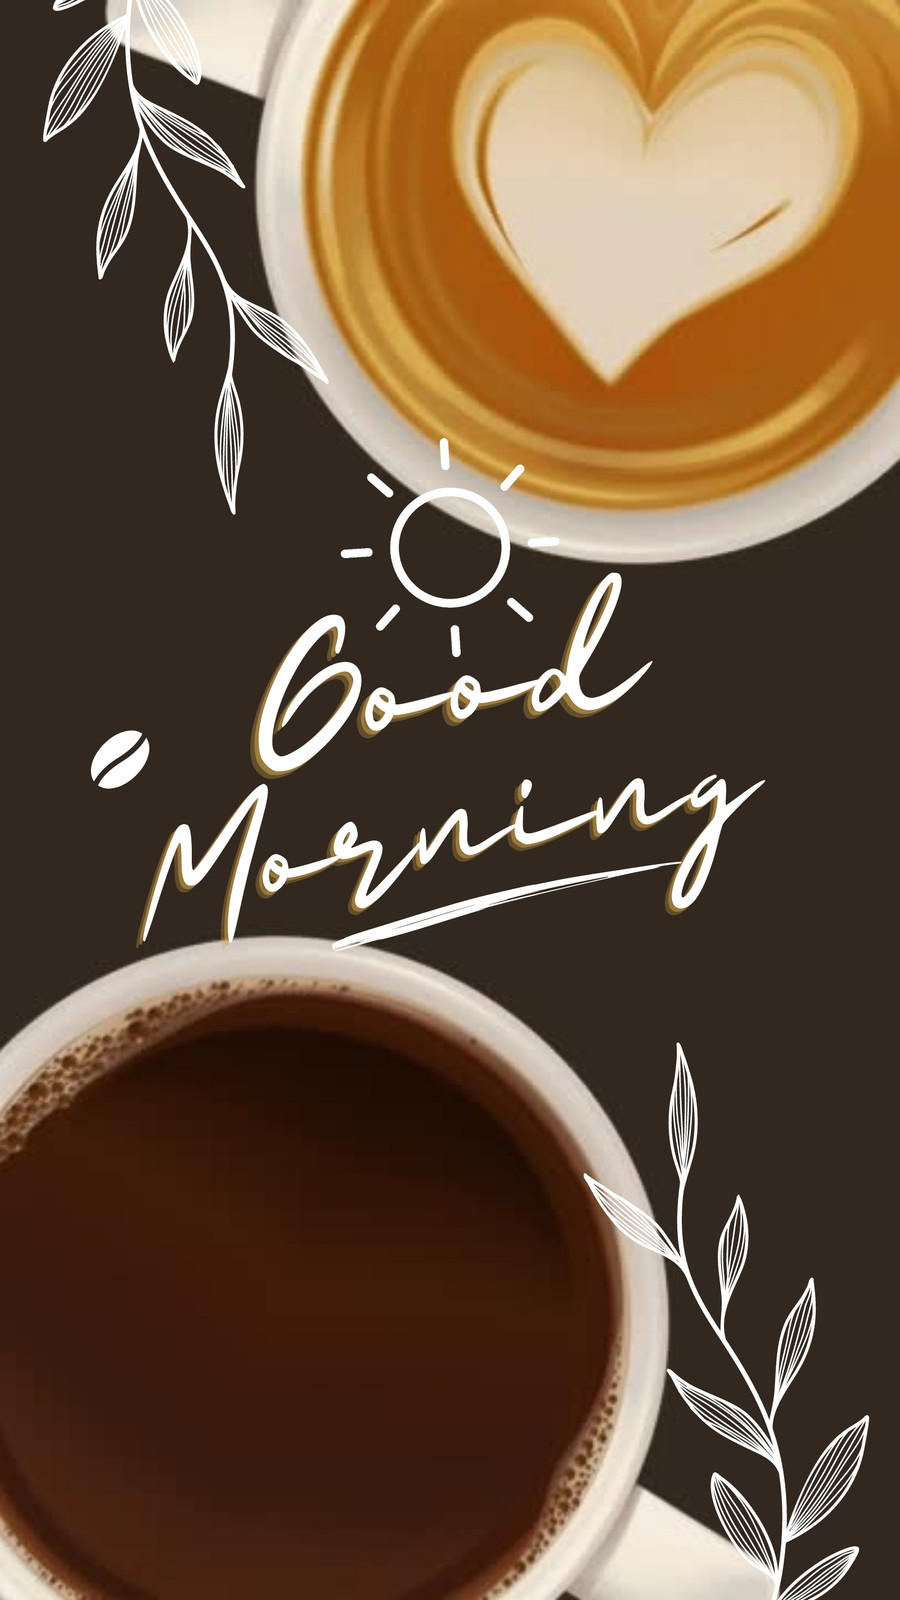 Page 6 - Free and customizable good morning templates